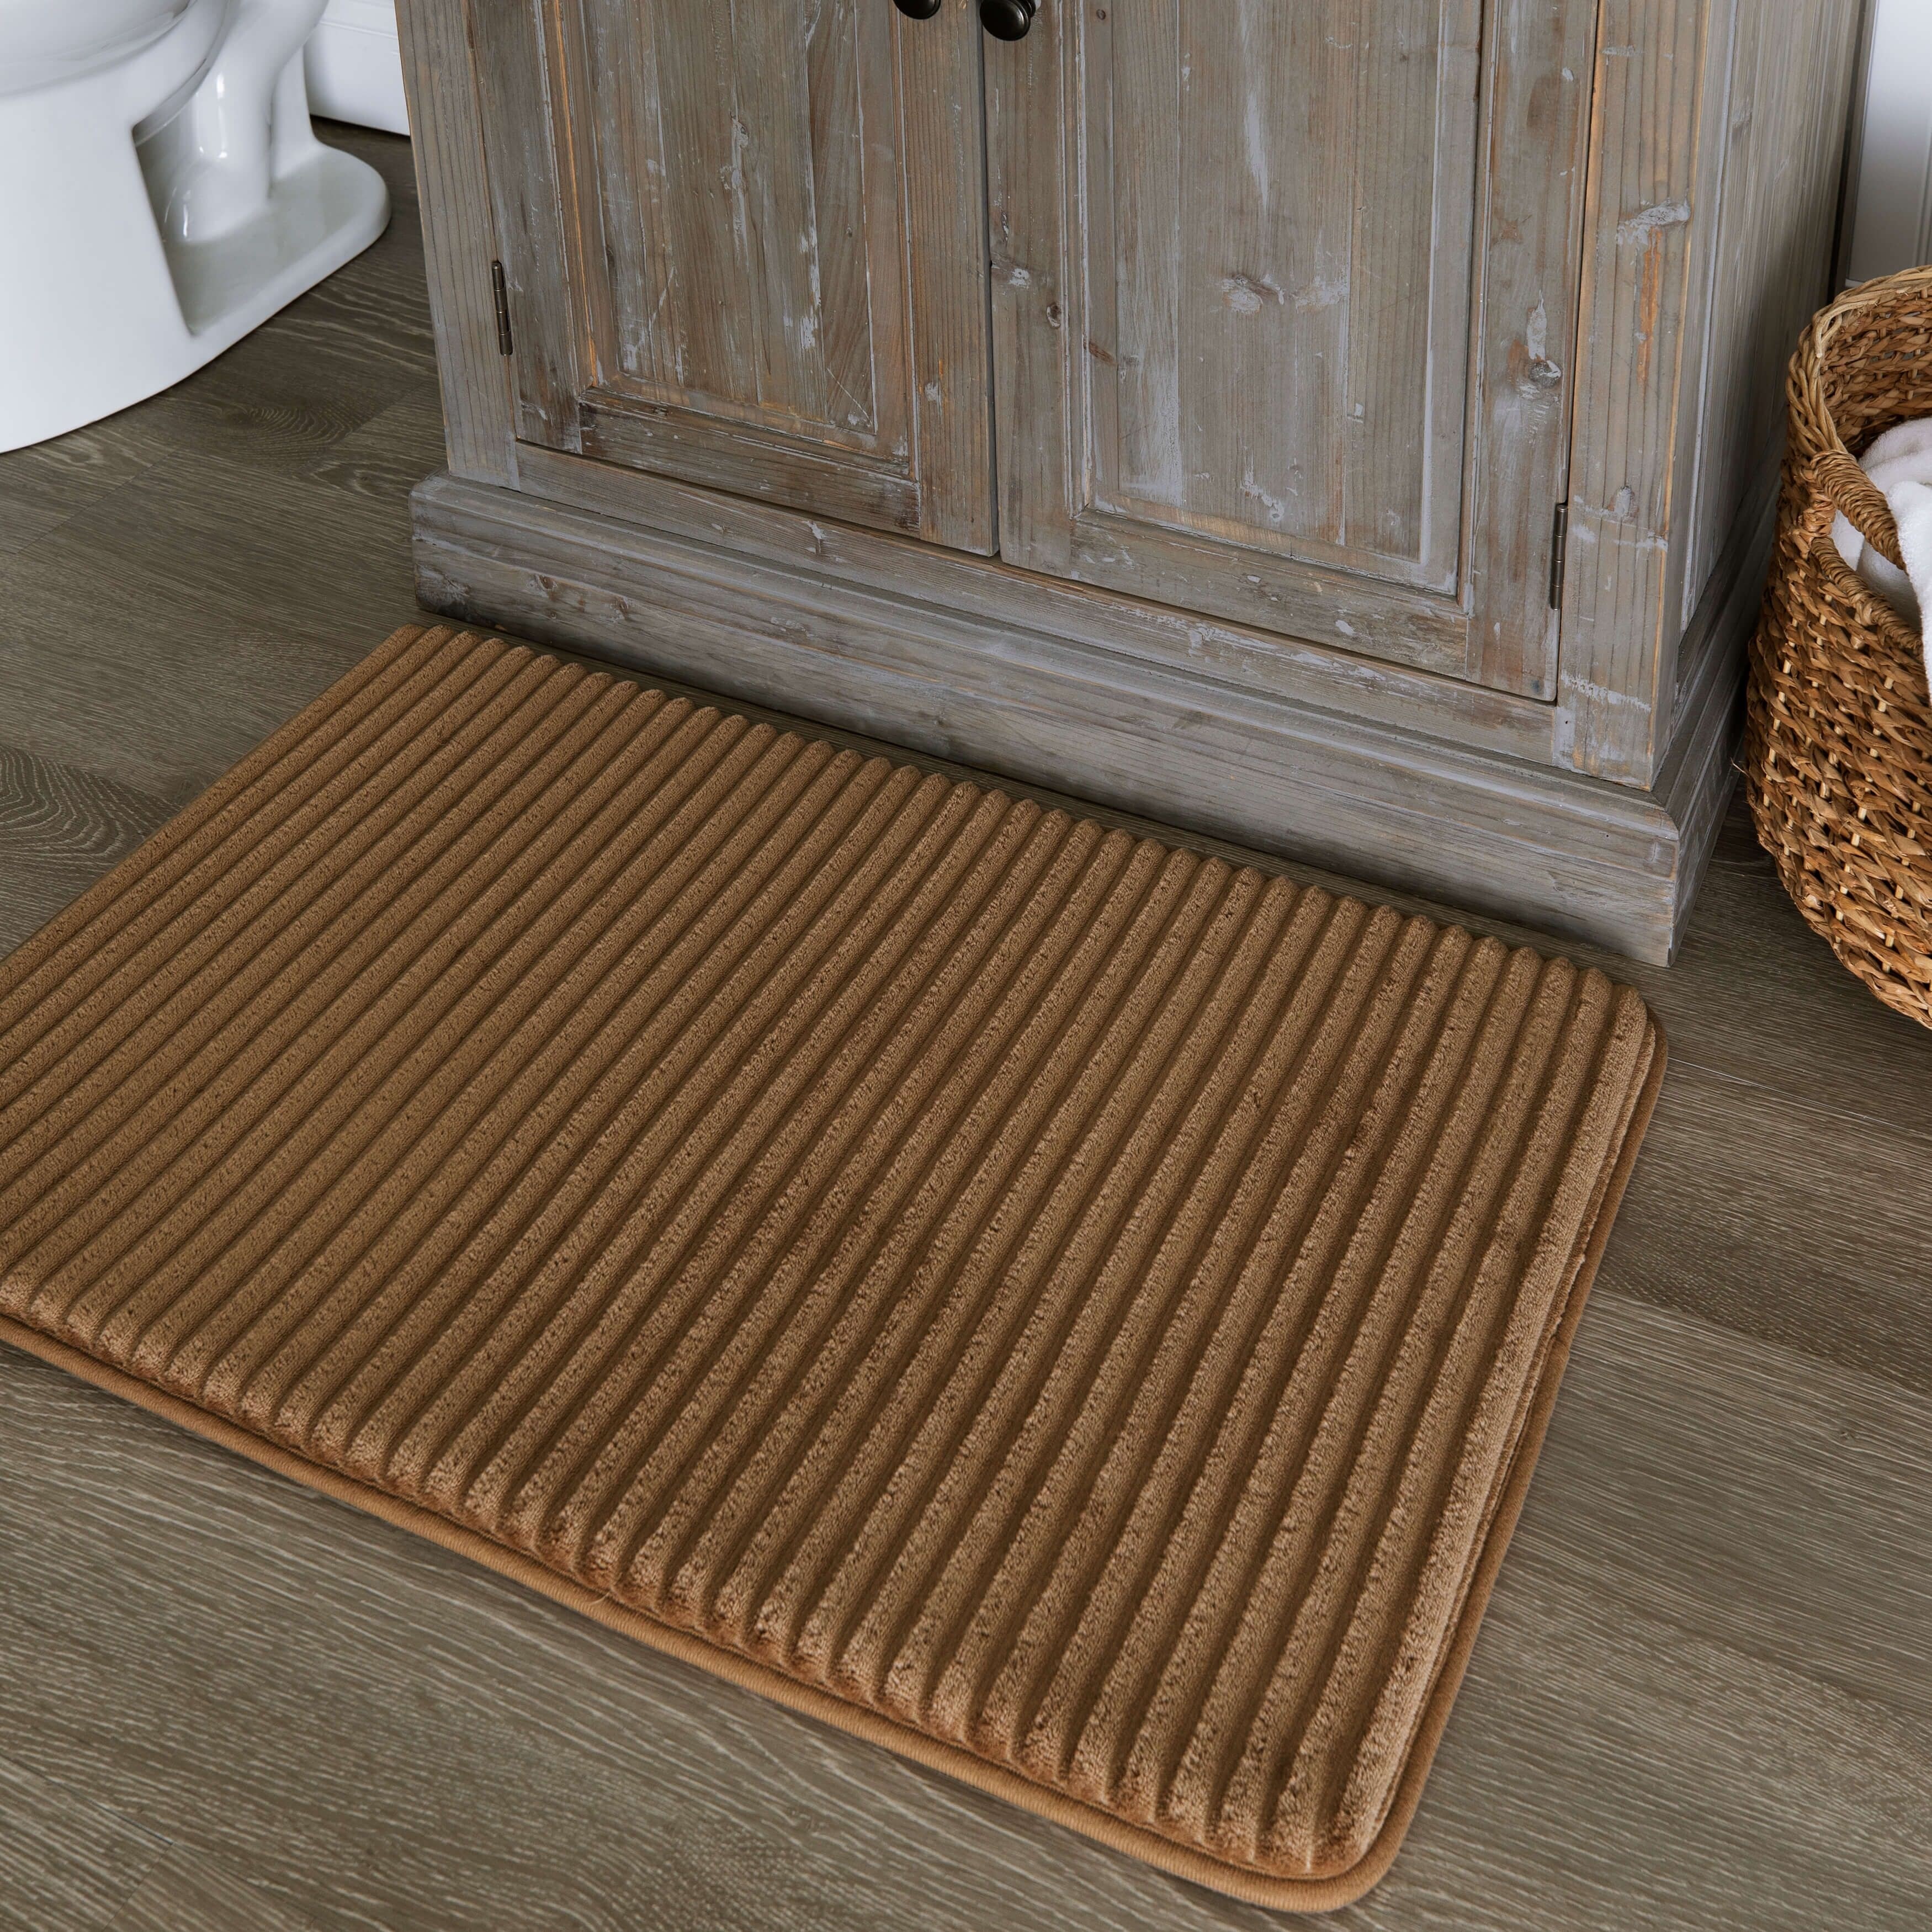 https://ak1.ostkcdn.com/images/products/is/images/direct/362d11debcb6ee25282e6baf9fa0e8c53ebcf4a6/Mohawk-Home-Machine-Washable-Vienna-Knitted-Bath-Mat.jpg